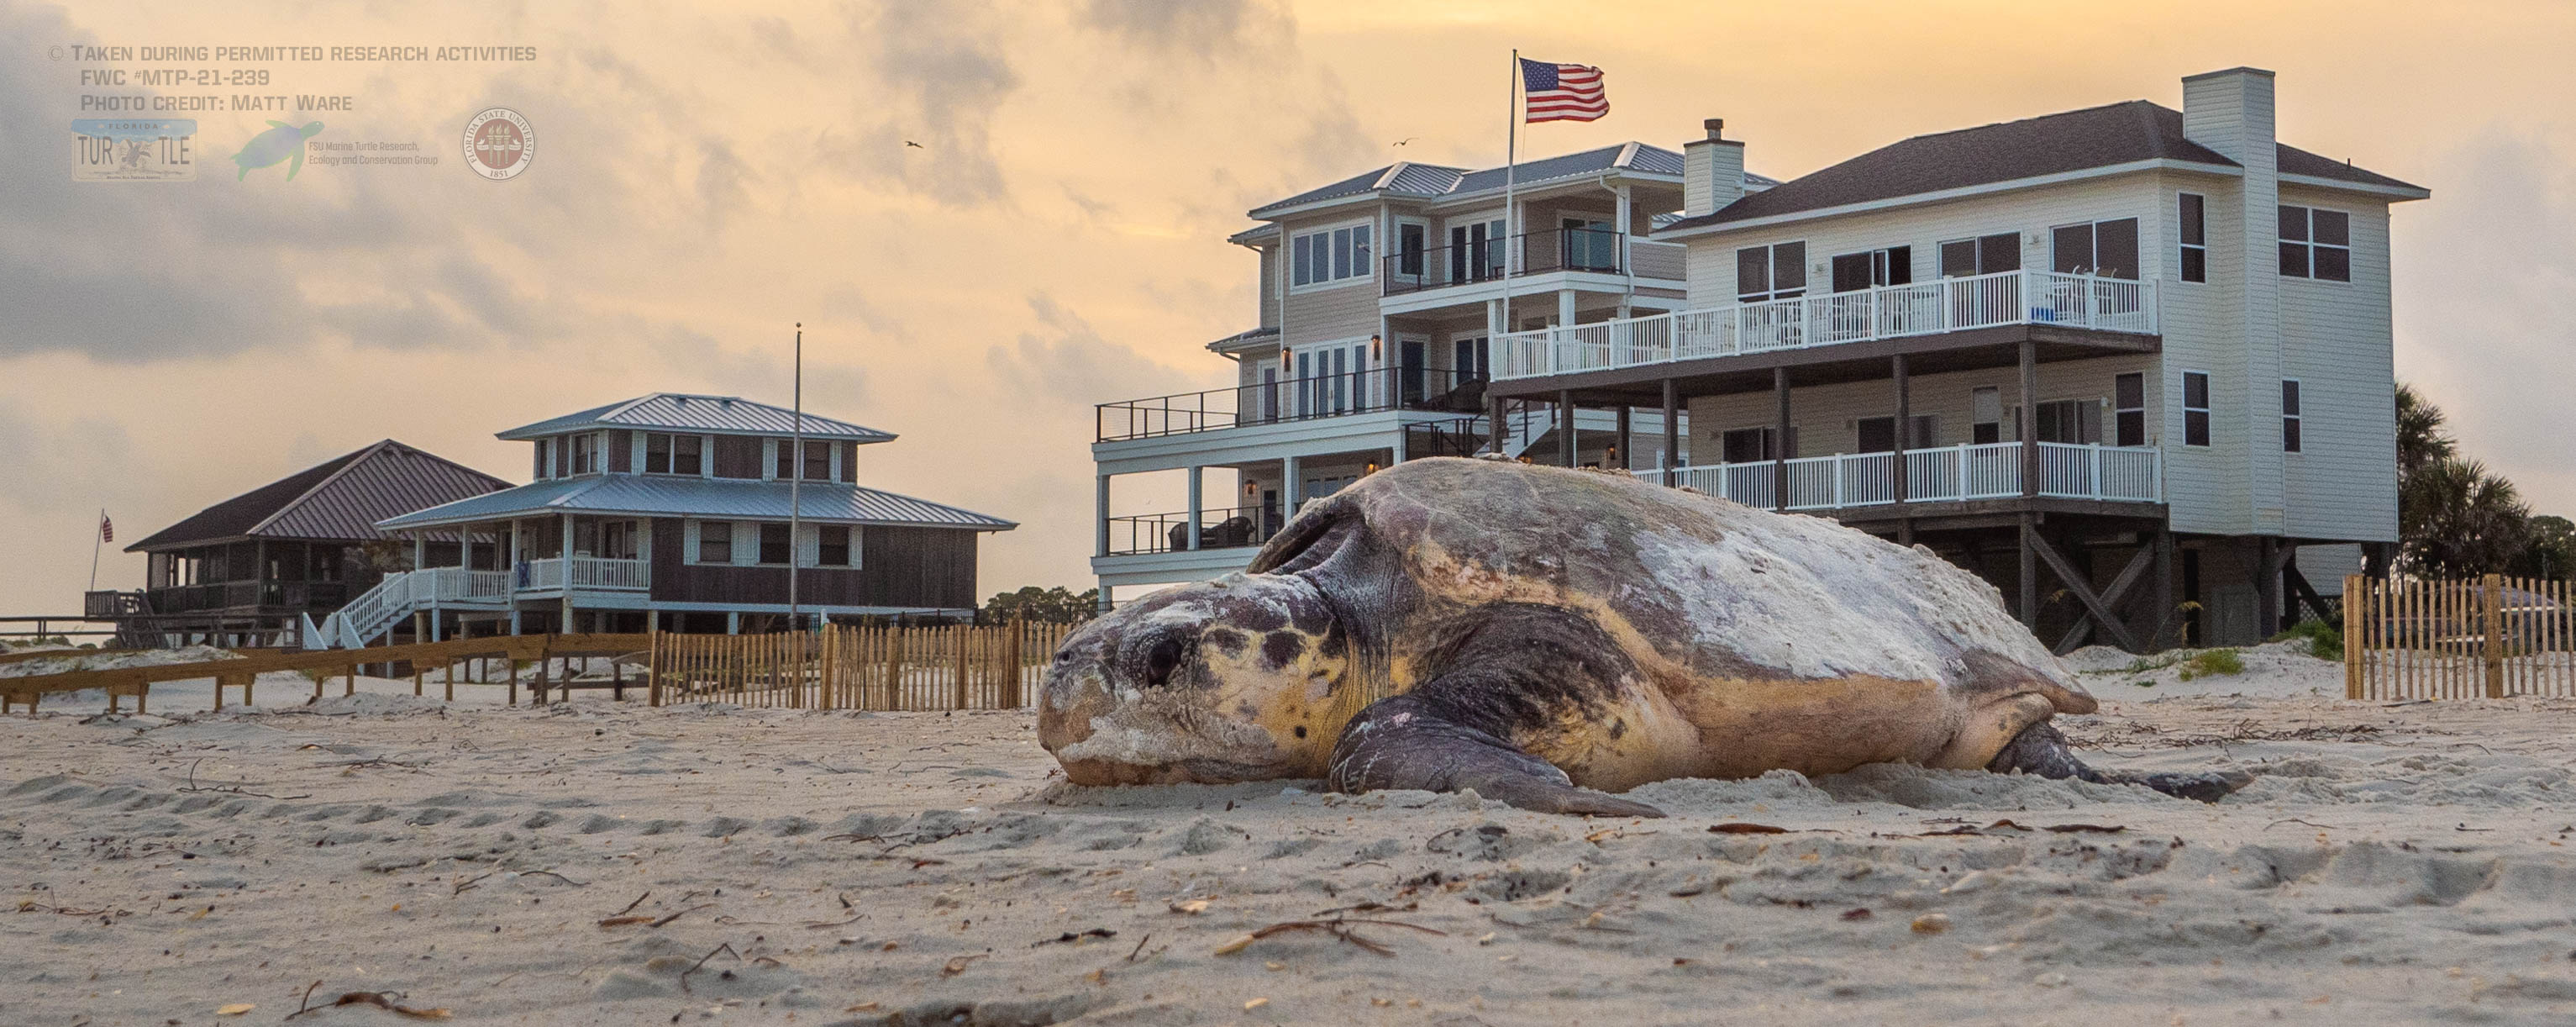 A loggerhead sea turtle crawling along the beach in front of multiple houses